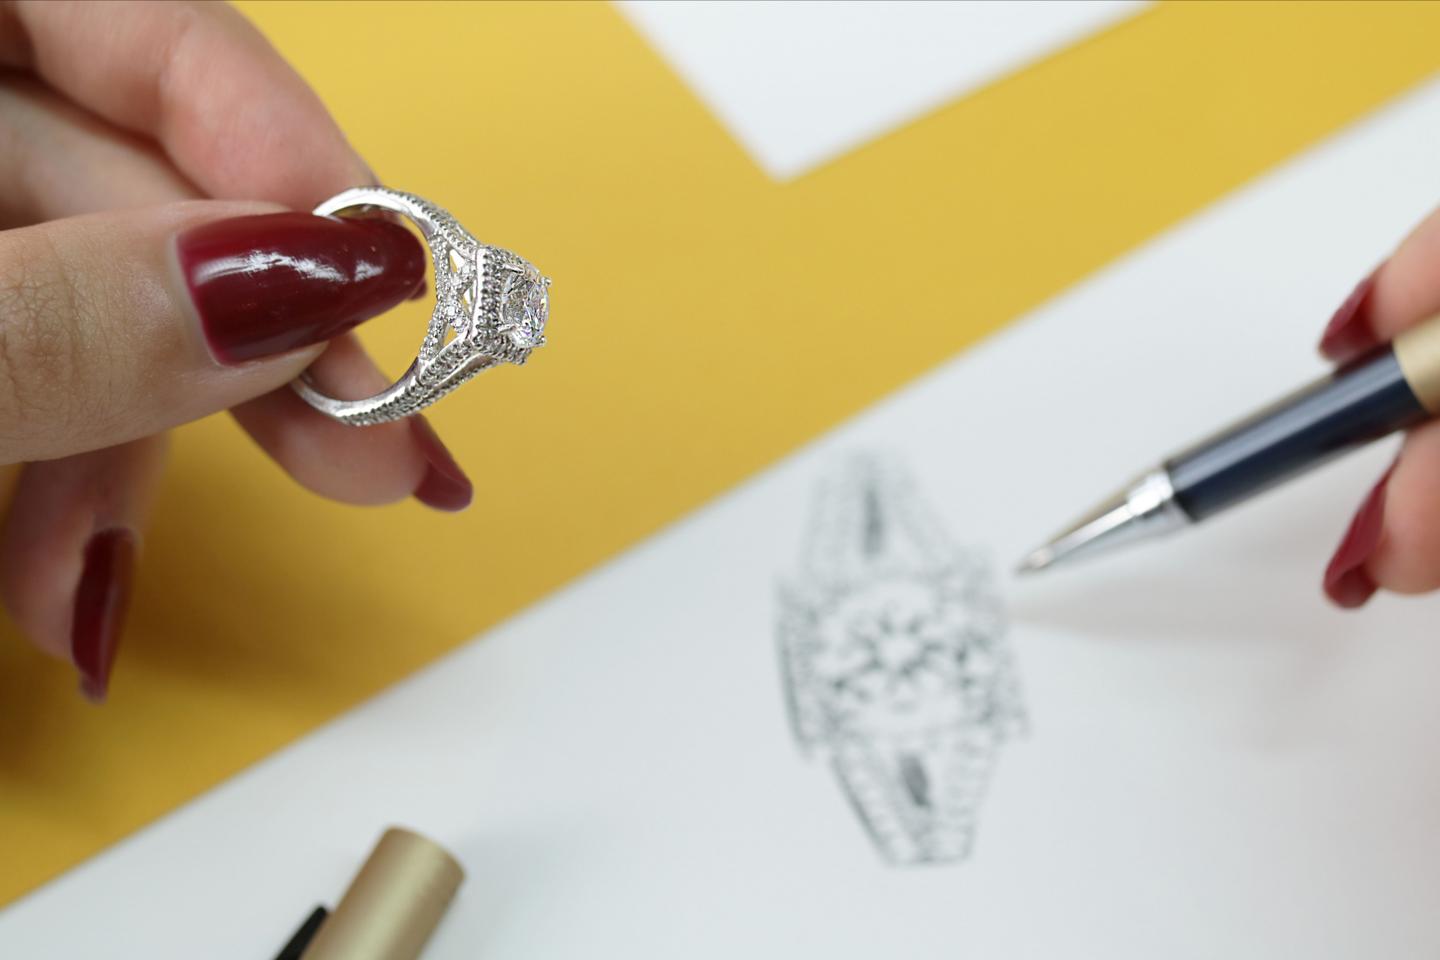 A jeweller where you can purchase diamonds with expertise combined with affordable online prices: it's possible!